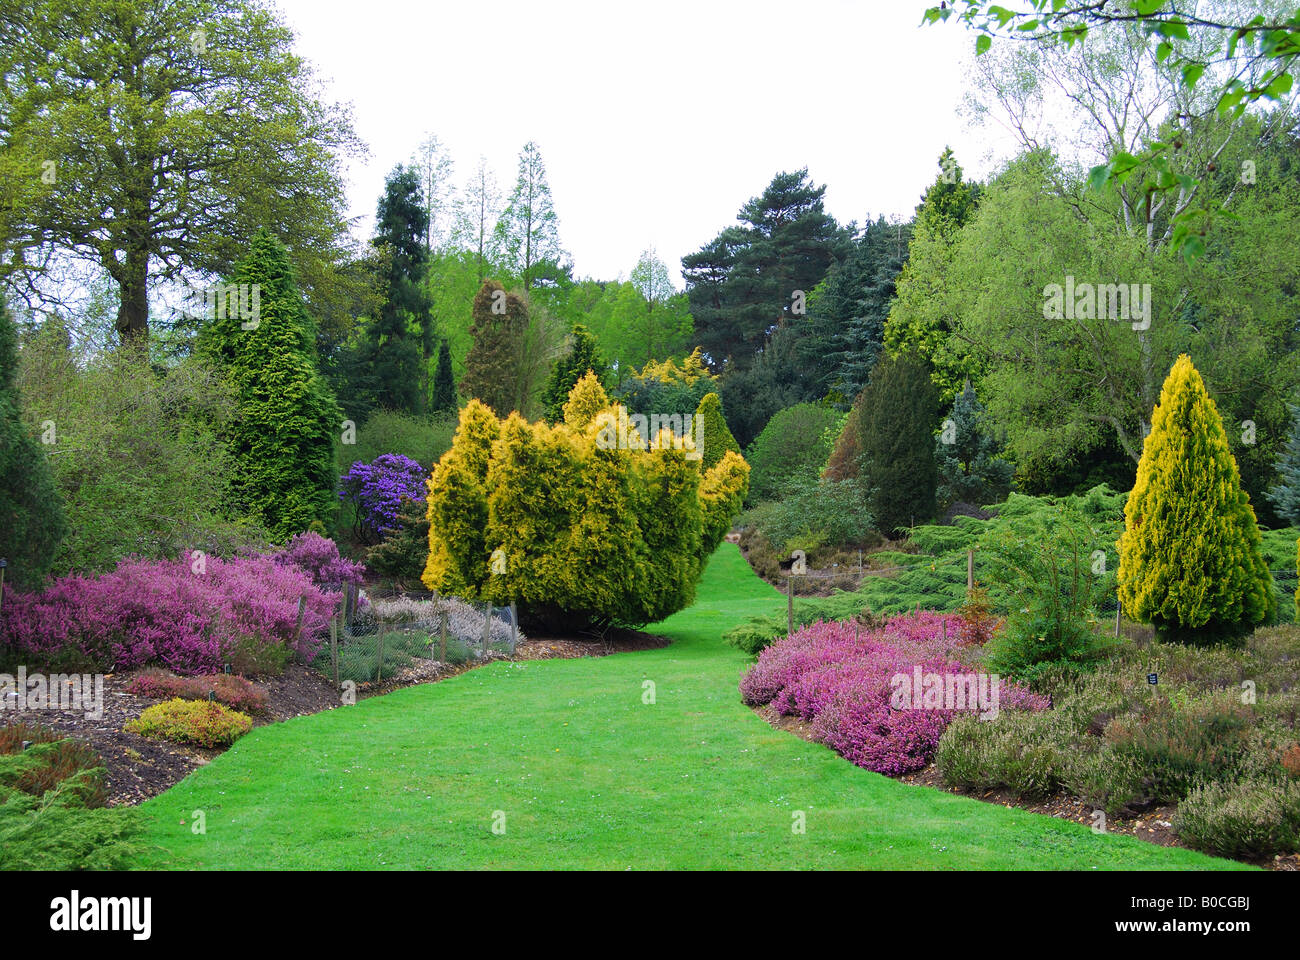 Jardin, Heather Valley Gardens, le Royal Paysage, Windsor Great Park, Virginia Water, Surrey, Angleterre, Royaume-Uni Banque D'Images